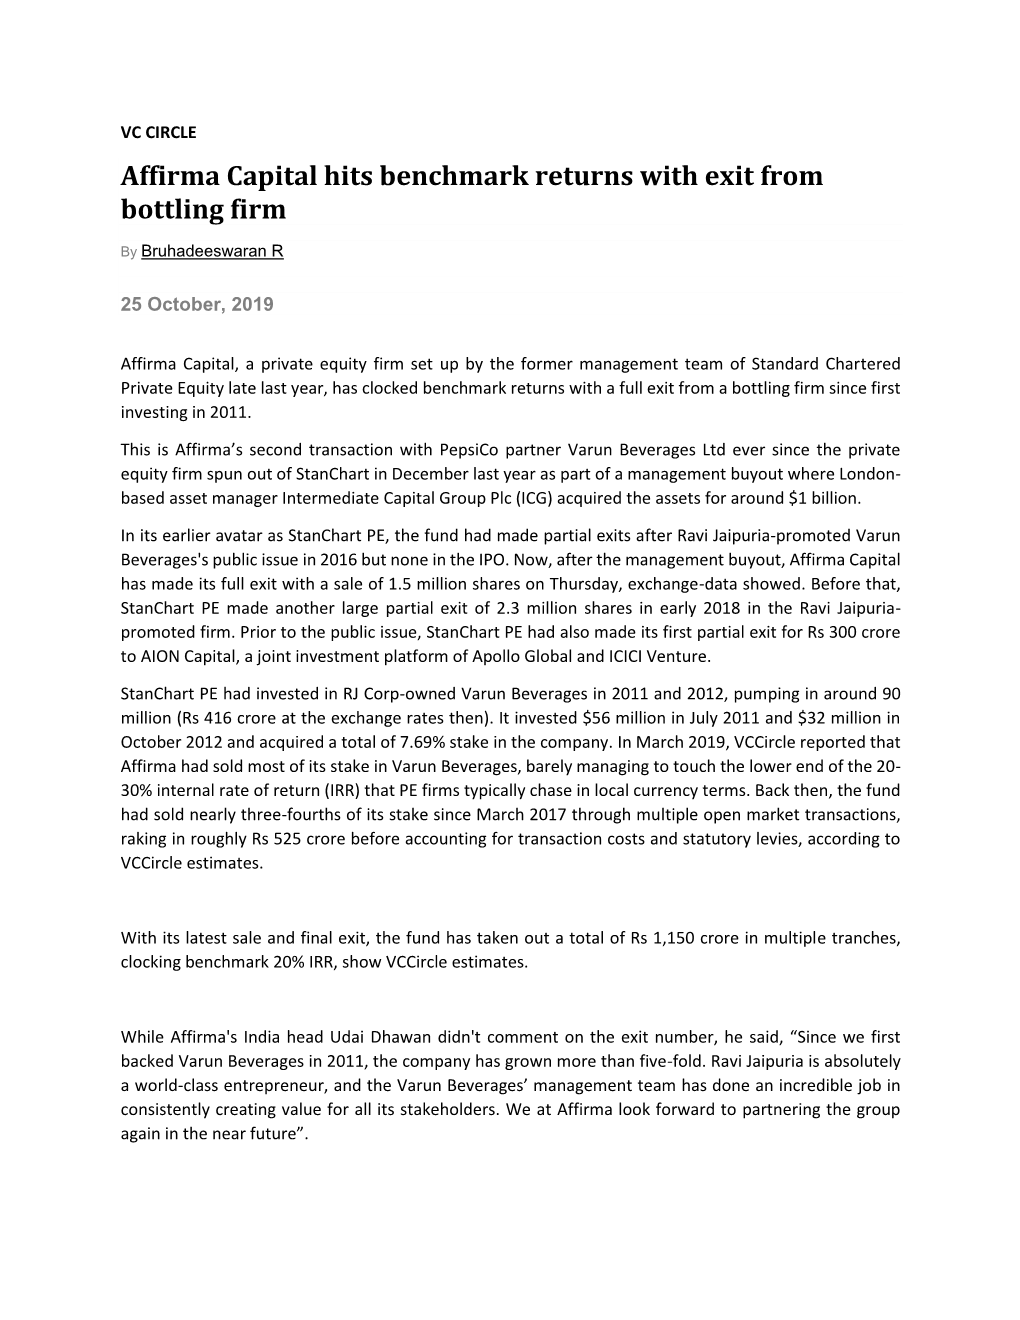 Affirma Capital Hits Benchmark Returns with Exit from Bottling Firm